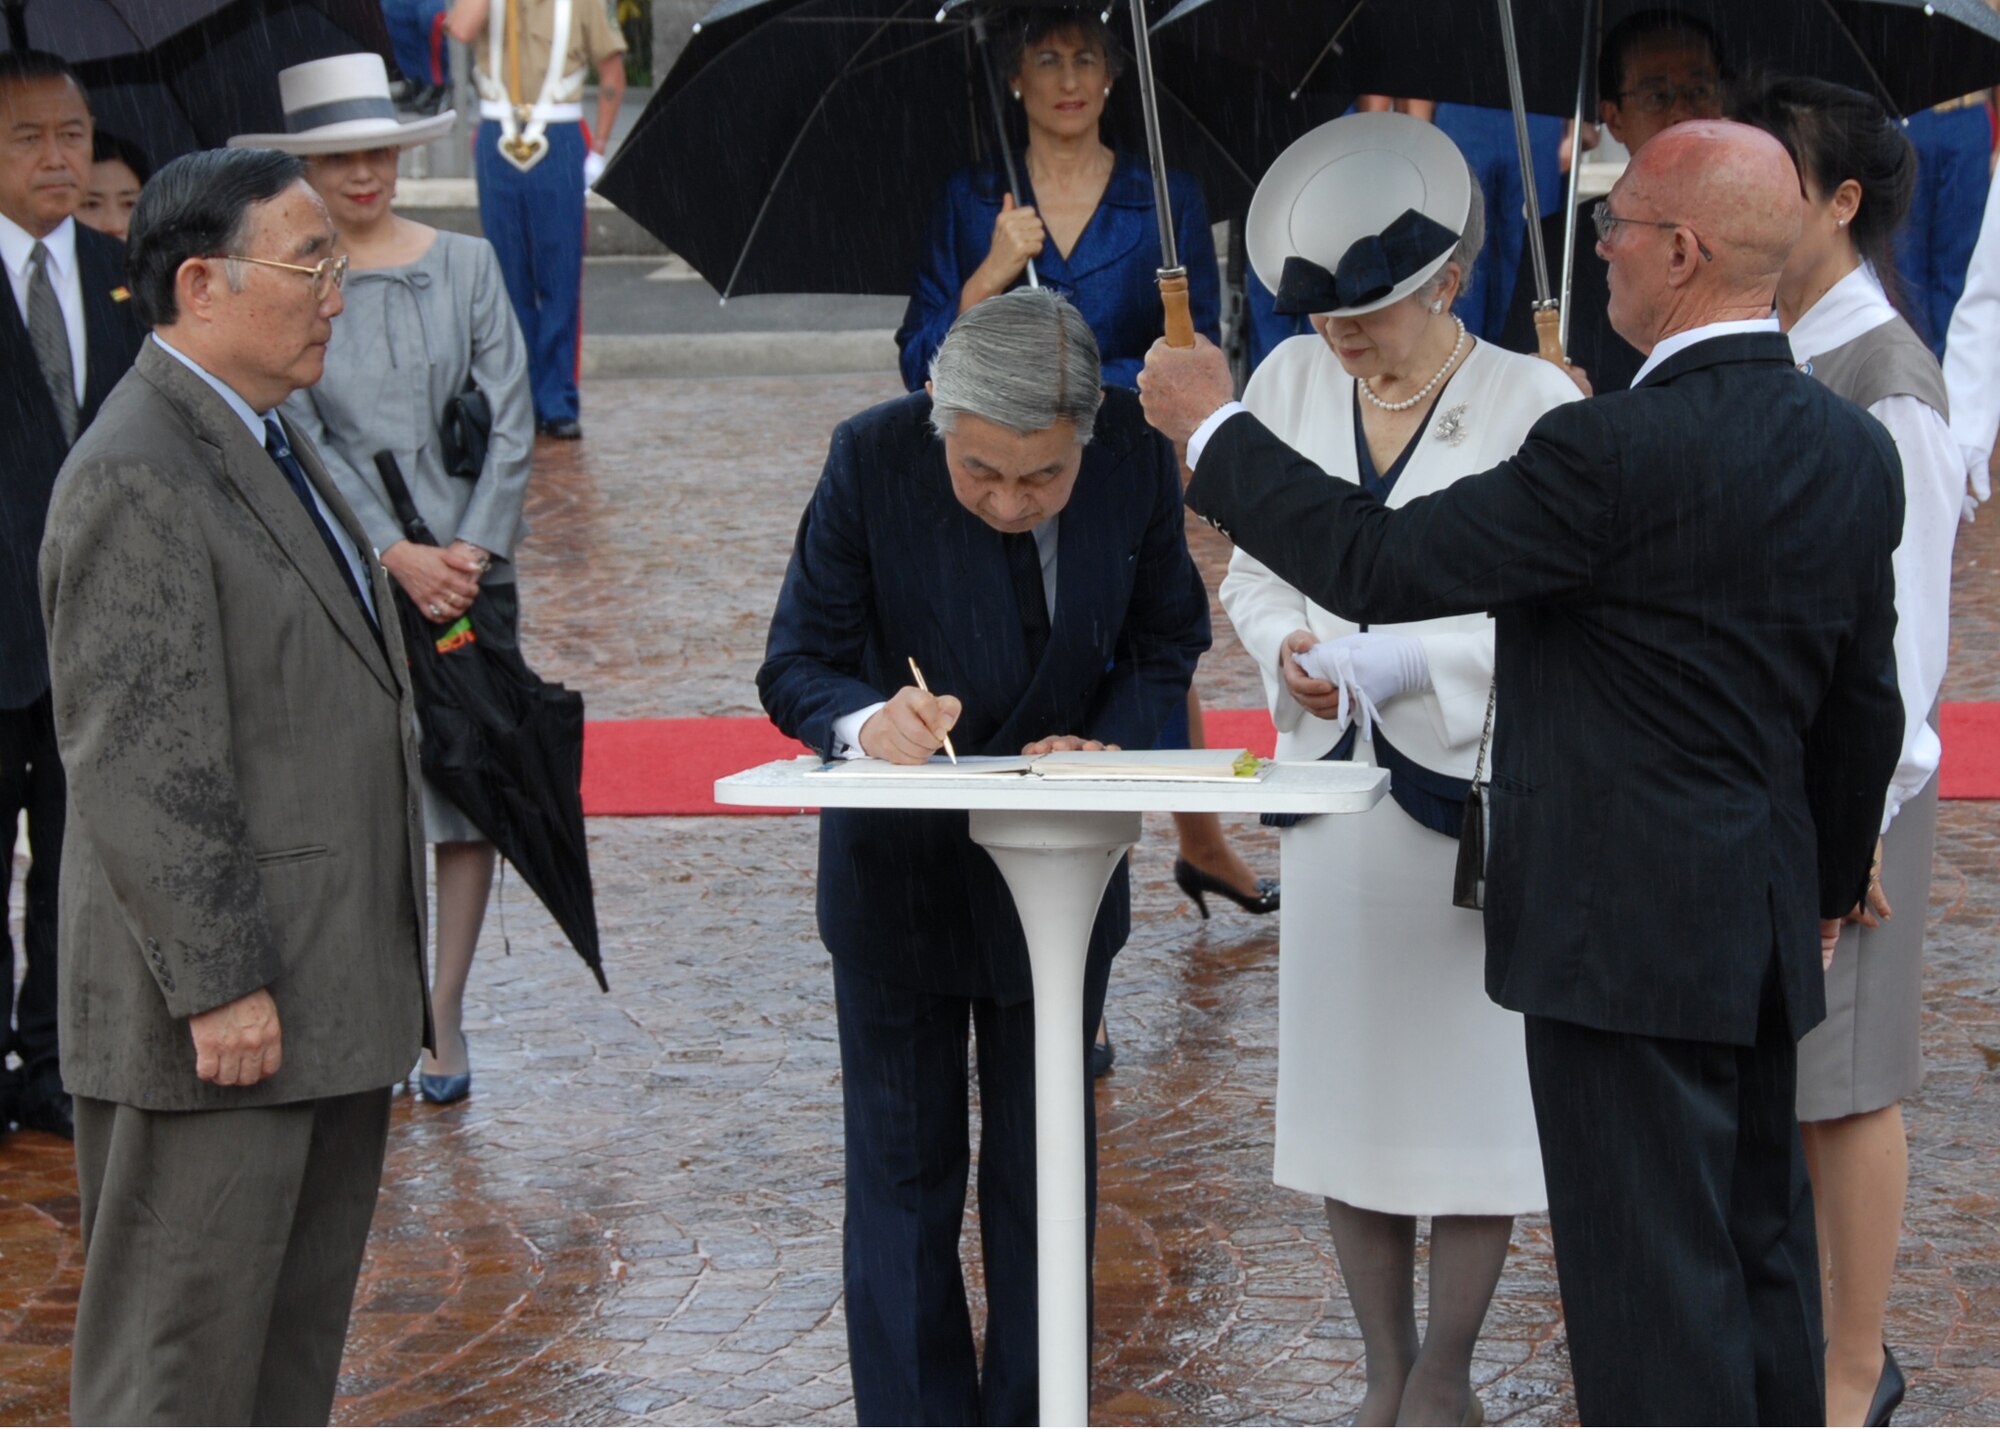 Emperor Akihito and Empress Michiko sign the guest book July 15 at the National Memorial Cemetery at Punchbowl Crater, Hawaii. The Imperial couple lay a wreath to honor the more than 50,000 service men and women interred at the cemetery. (U.S. Air Force photo/Staff Sgt. LuCelia Ball)